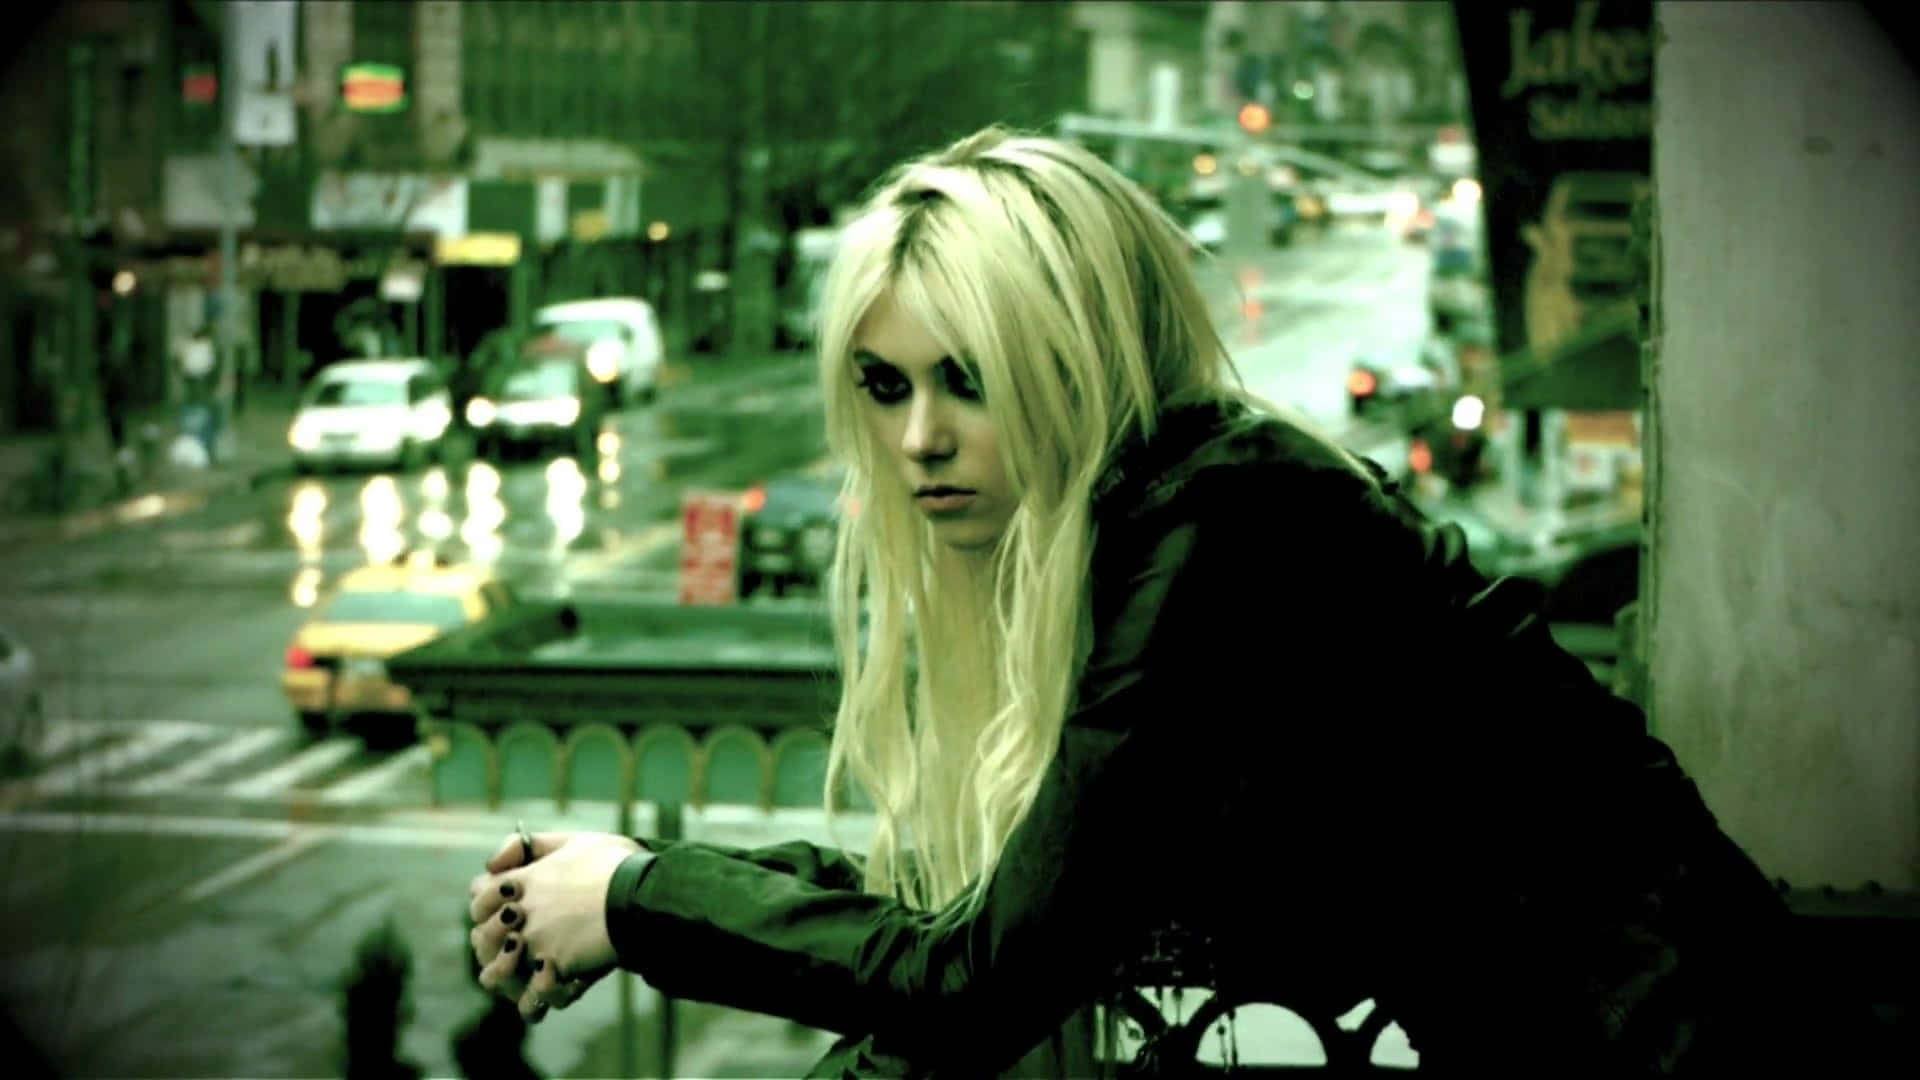 The Pretty Reckless Singer In Black Long Sleeve Wallpaper